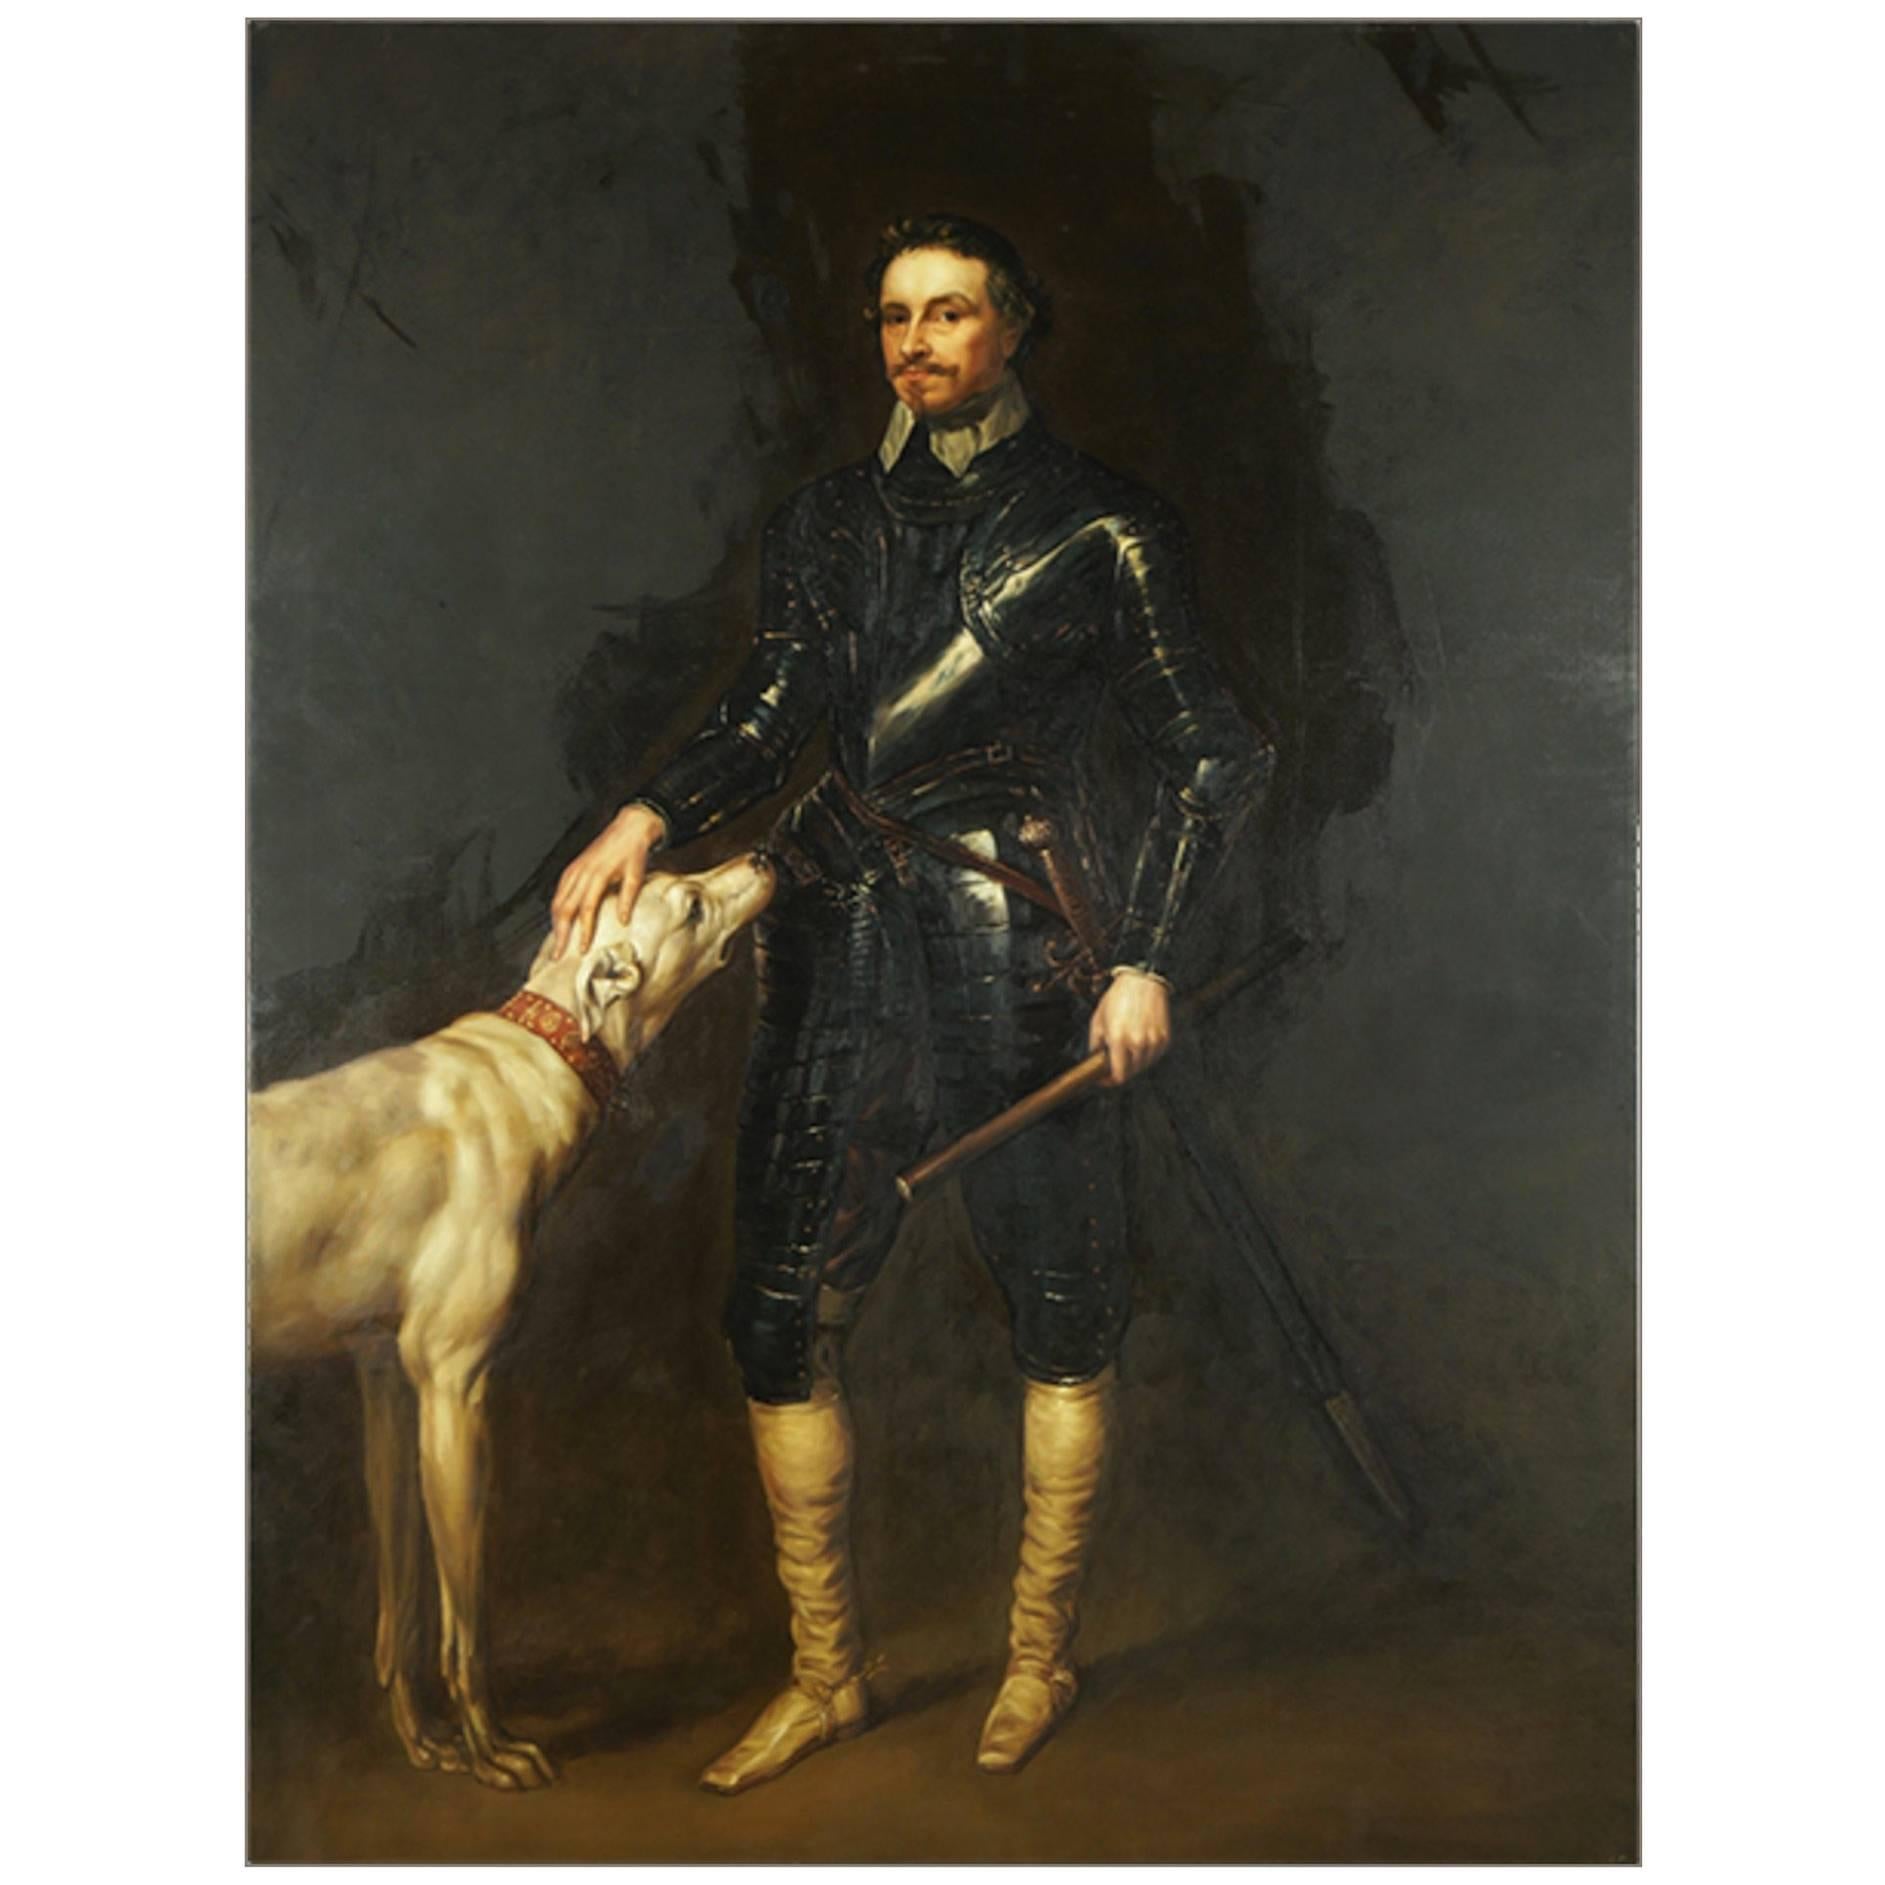 Monumental Nobleman in Armor with Dog, Very Dramatic, Contemporary